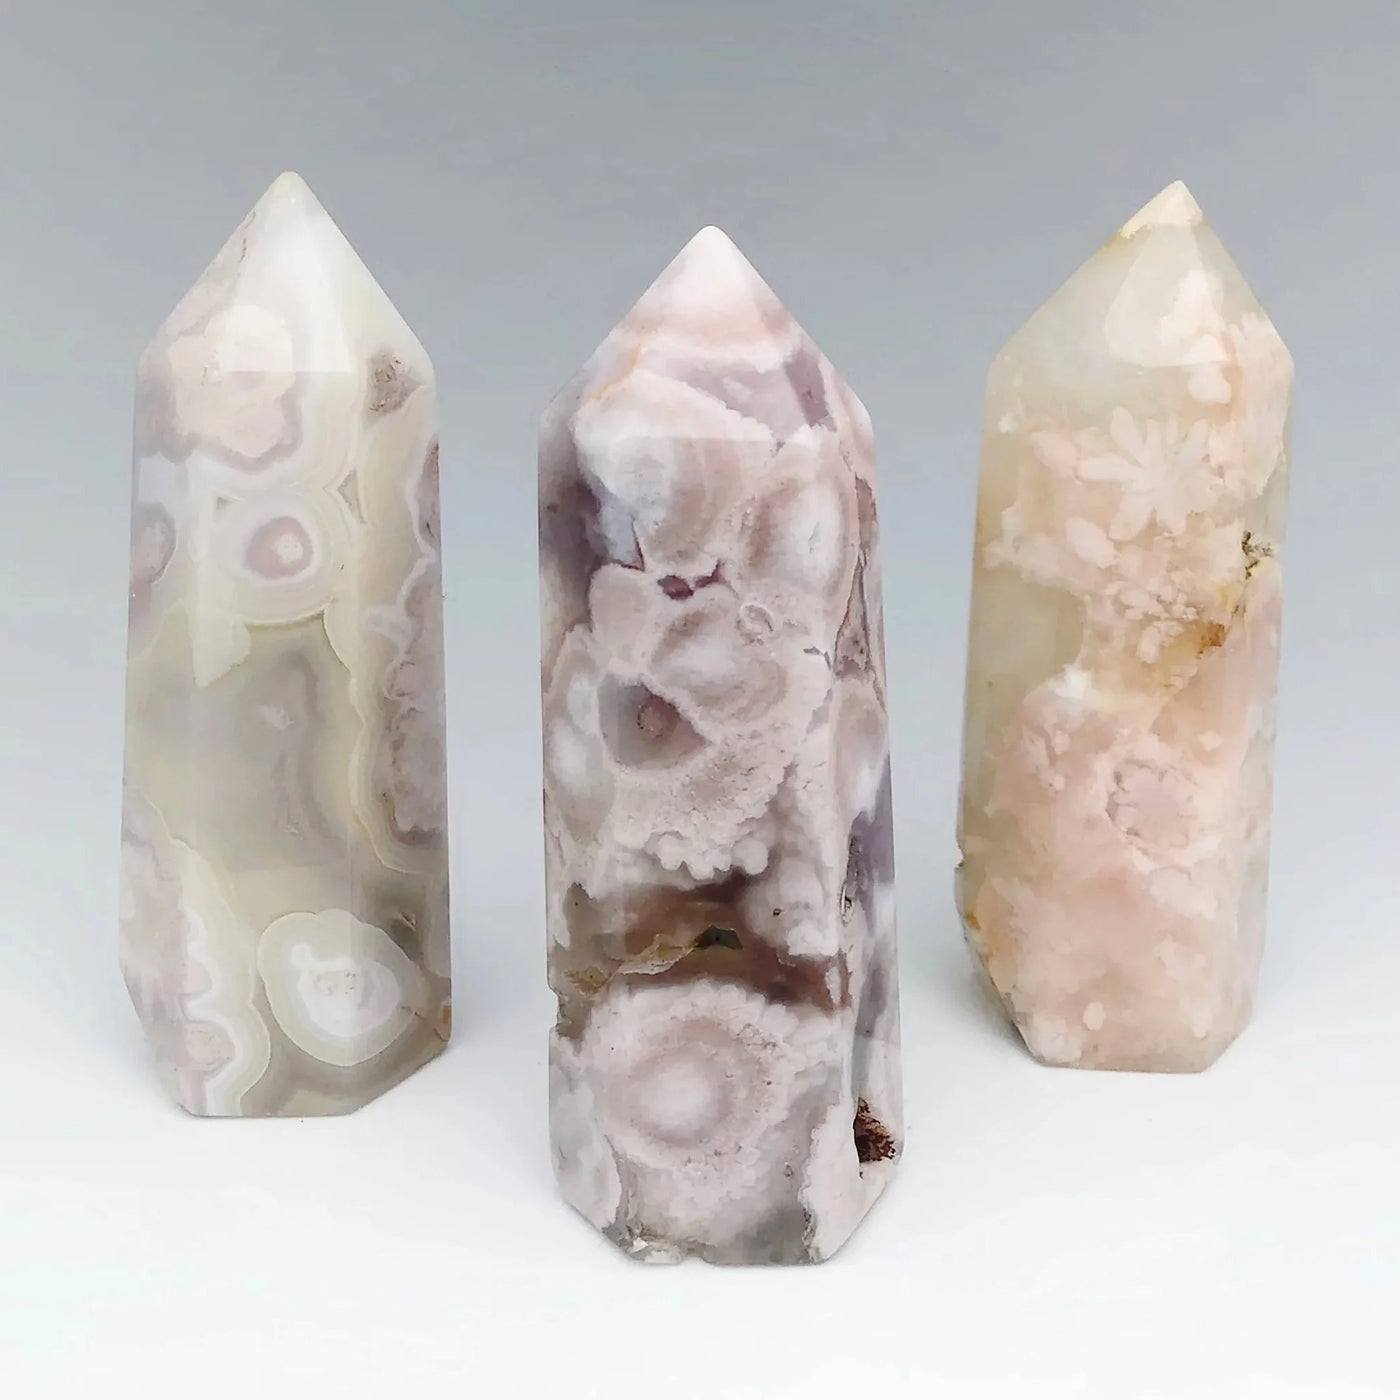 Flower Agate Point at $59 Each